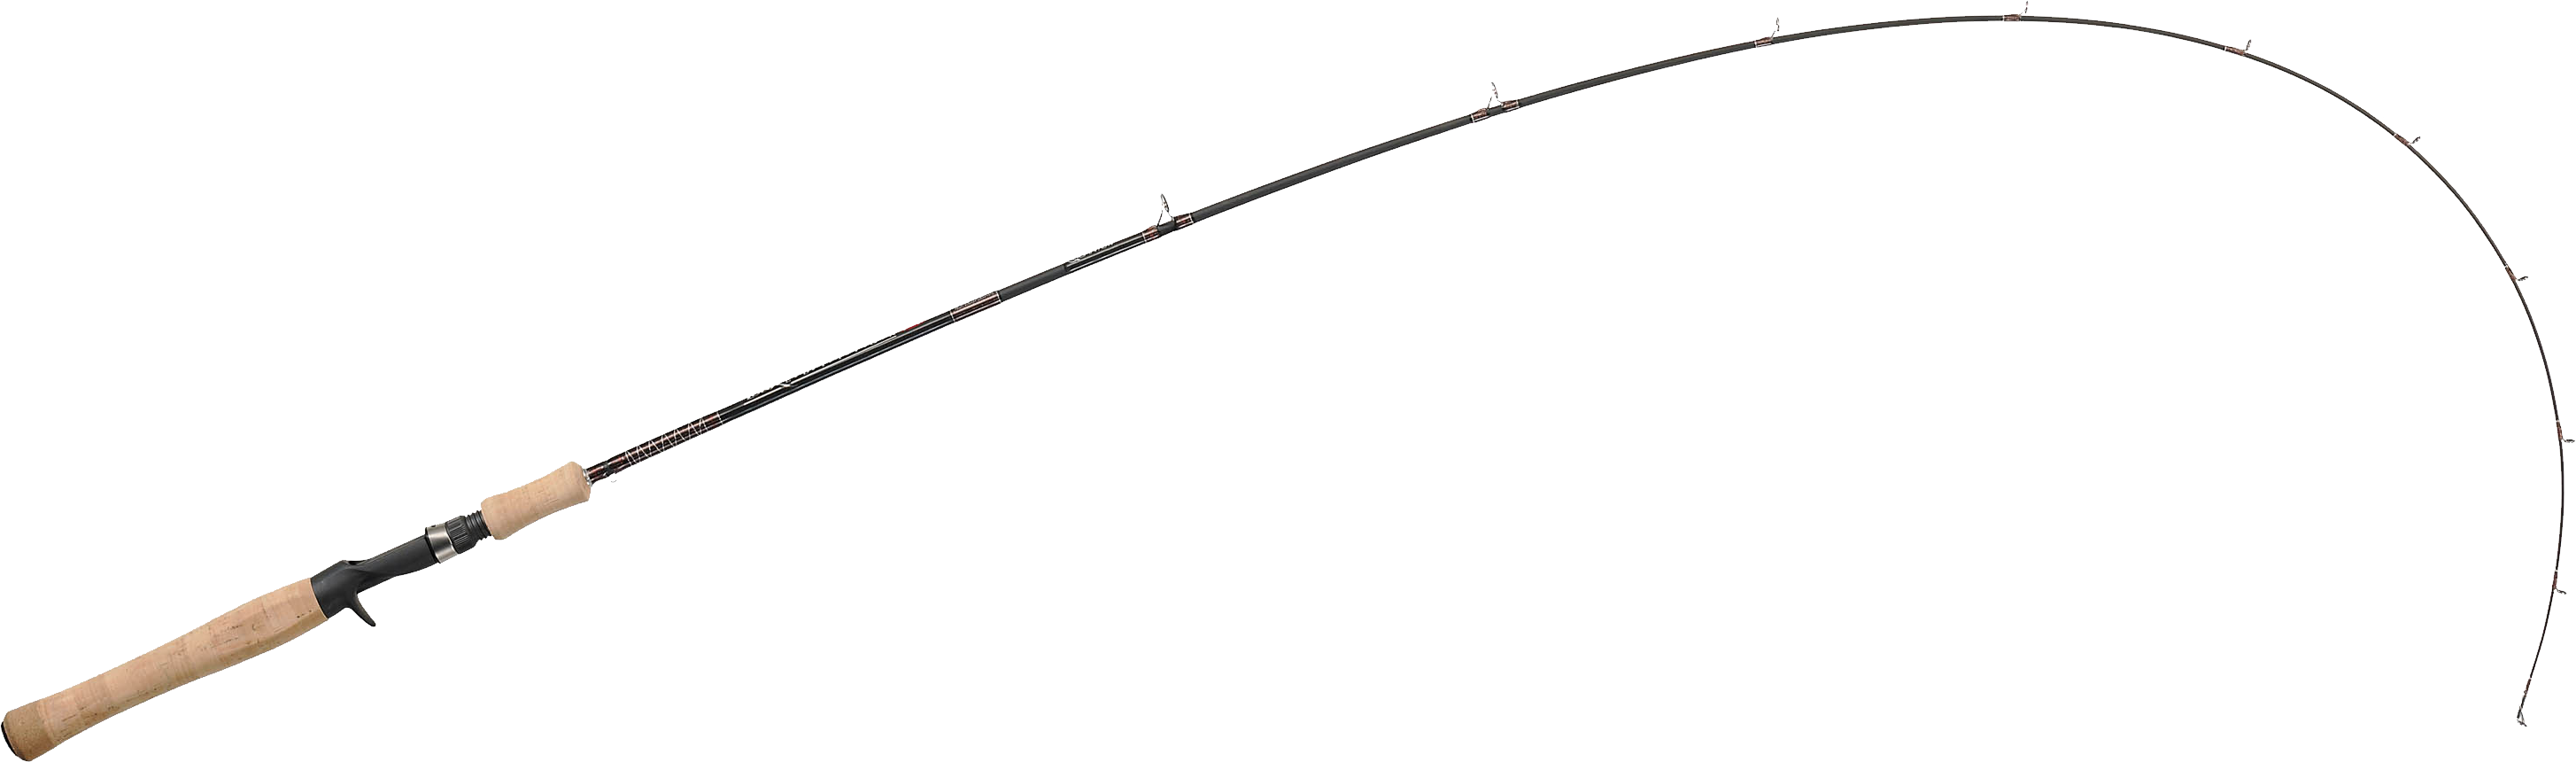 Fly Fishing Png Hd - Download Fishing Pole Png Images Transparent Gallery. Advertisement   Fishing Pole Png, Transparent background PNG HD thumbnail